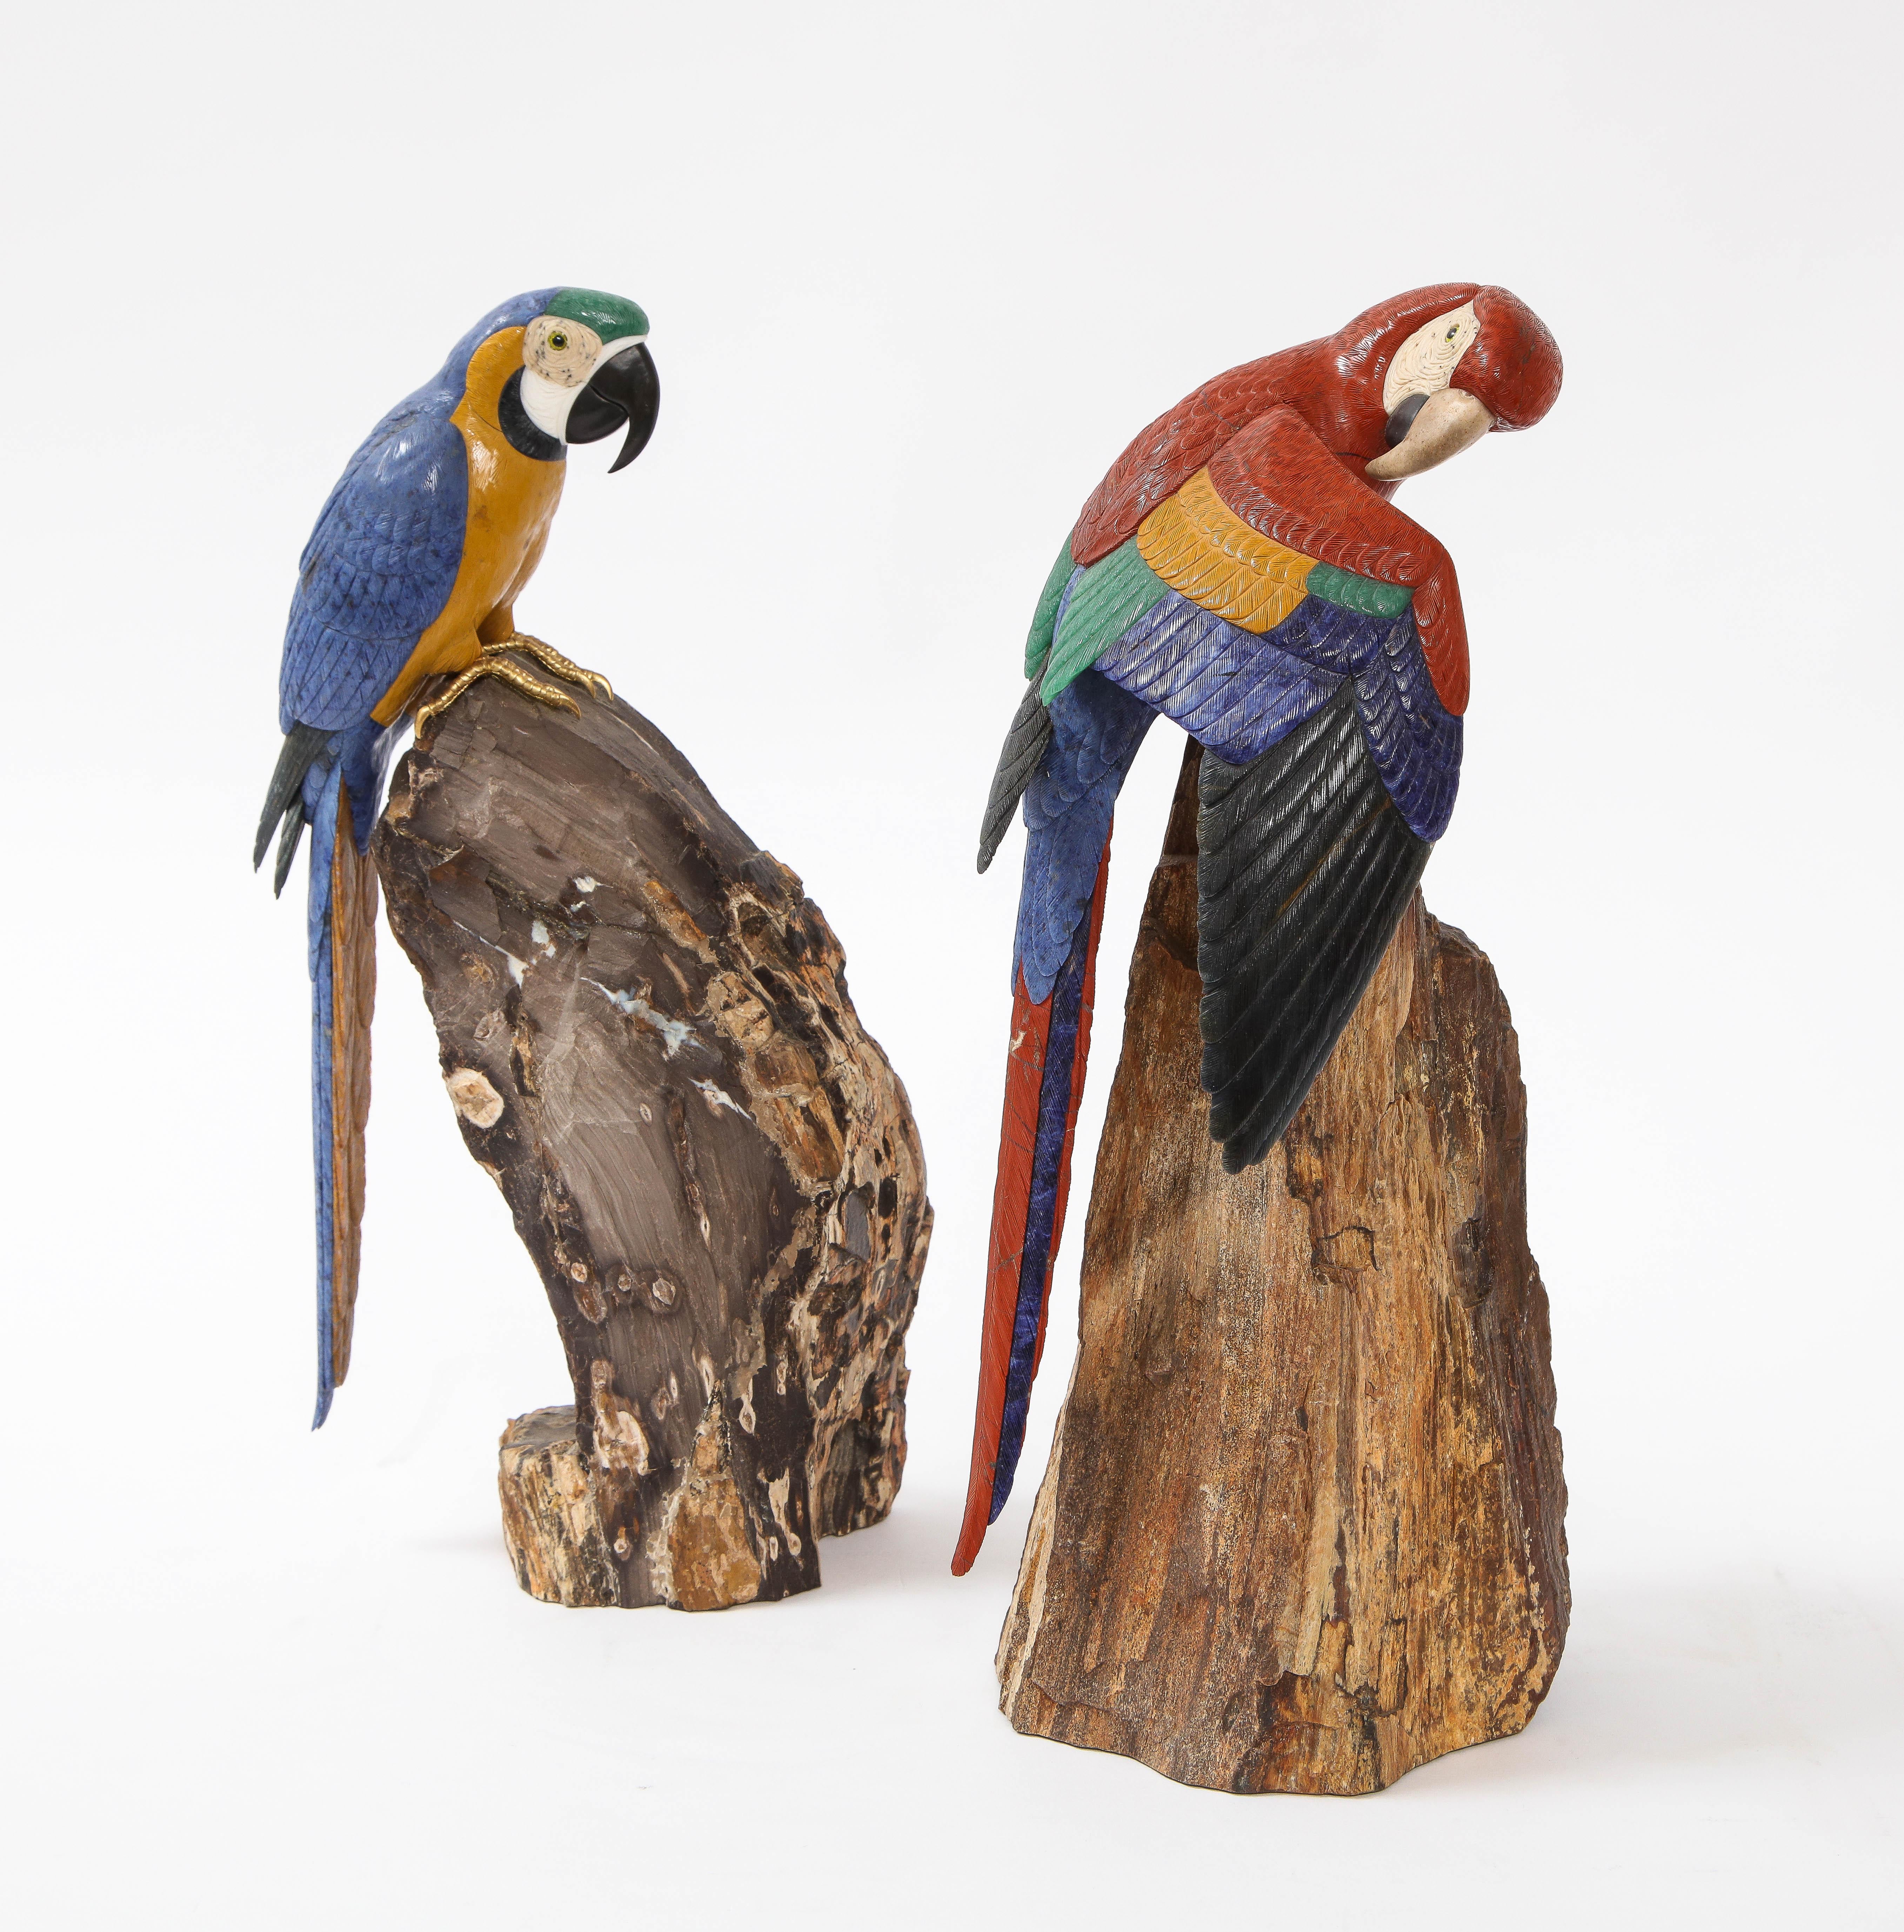 20th Century Pr. Semi Precious Stone & Gold Models of Scarlet Macaw Parrots, P. Müller, Swiss